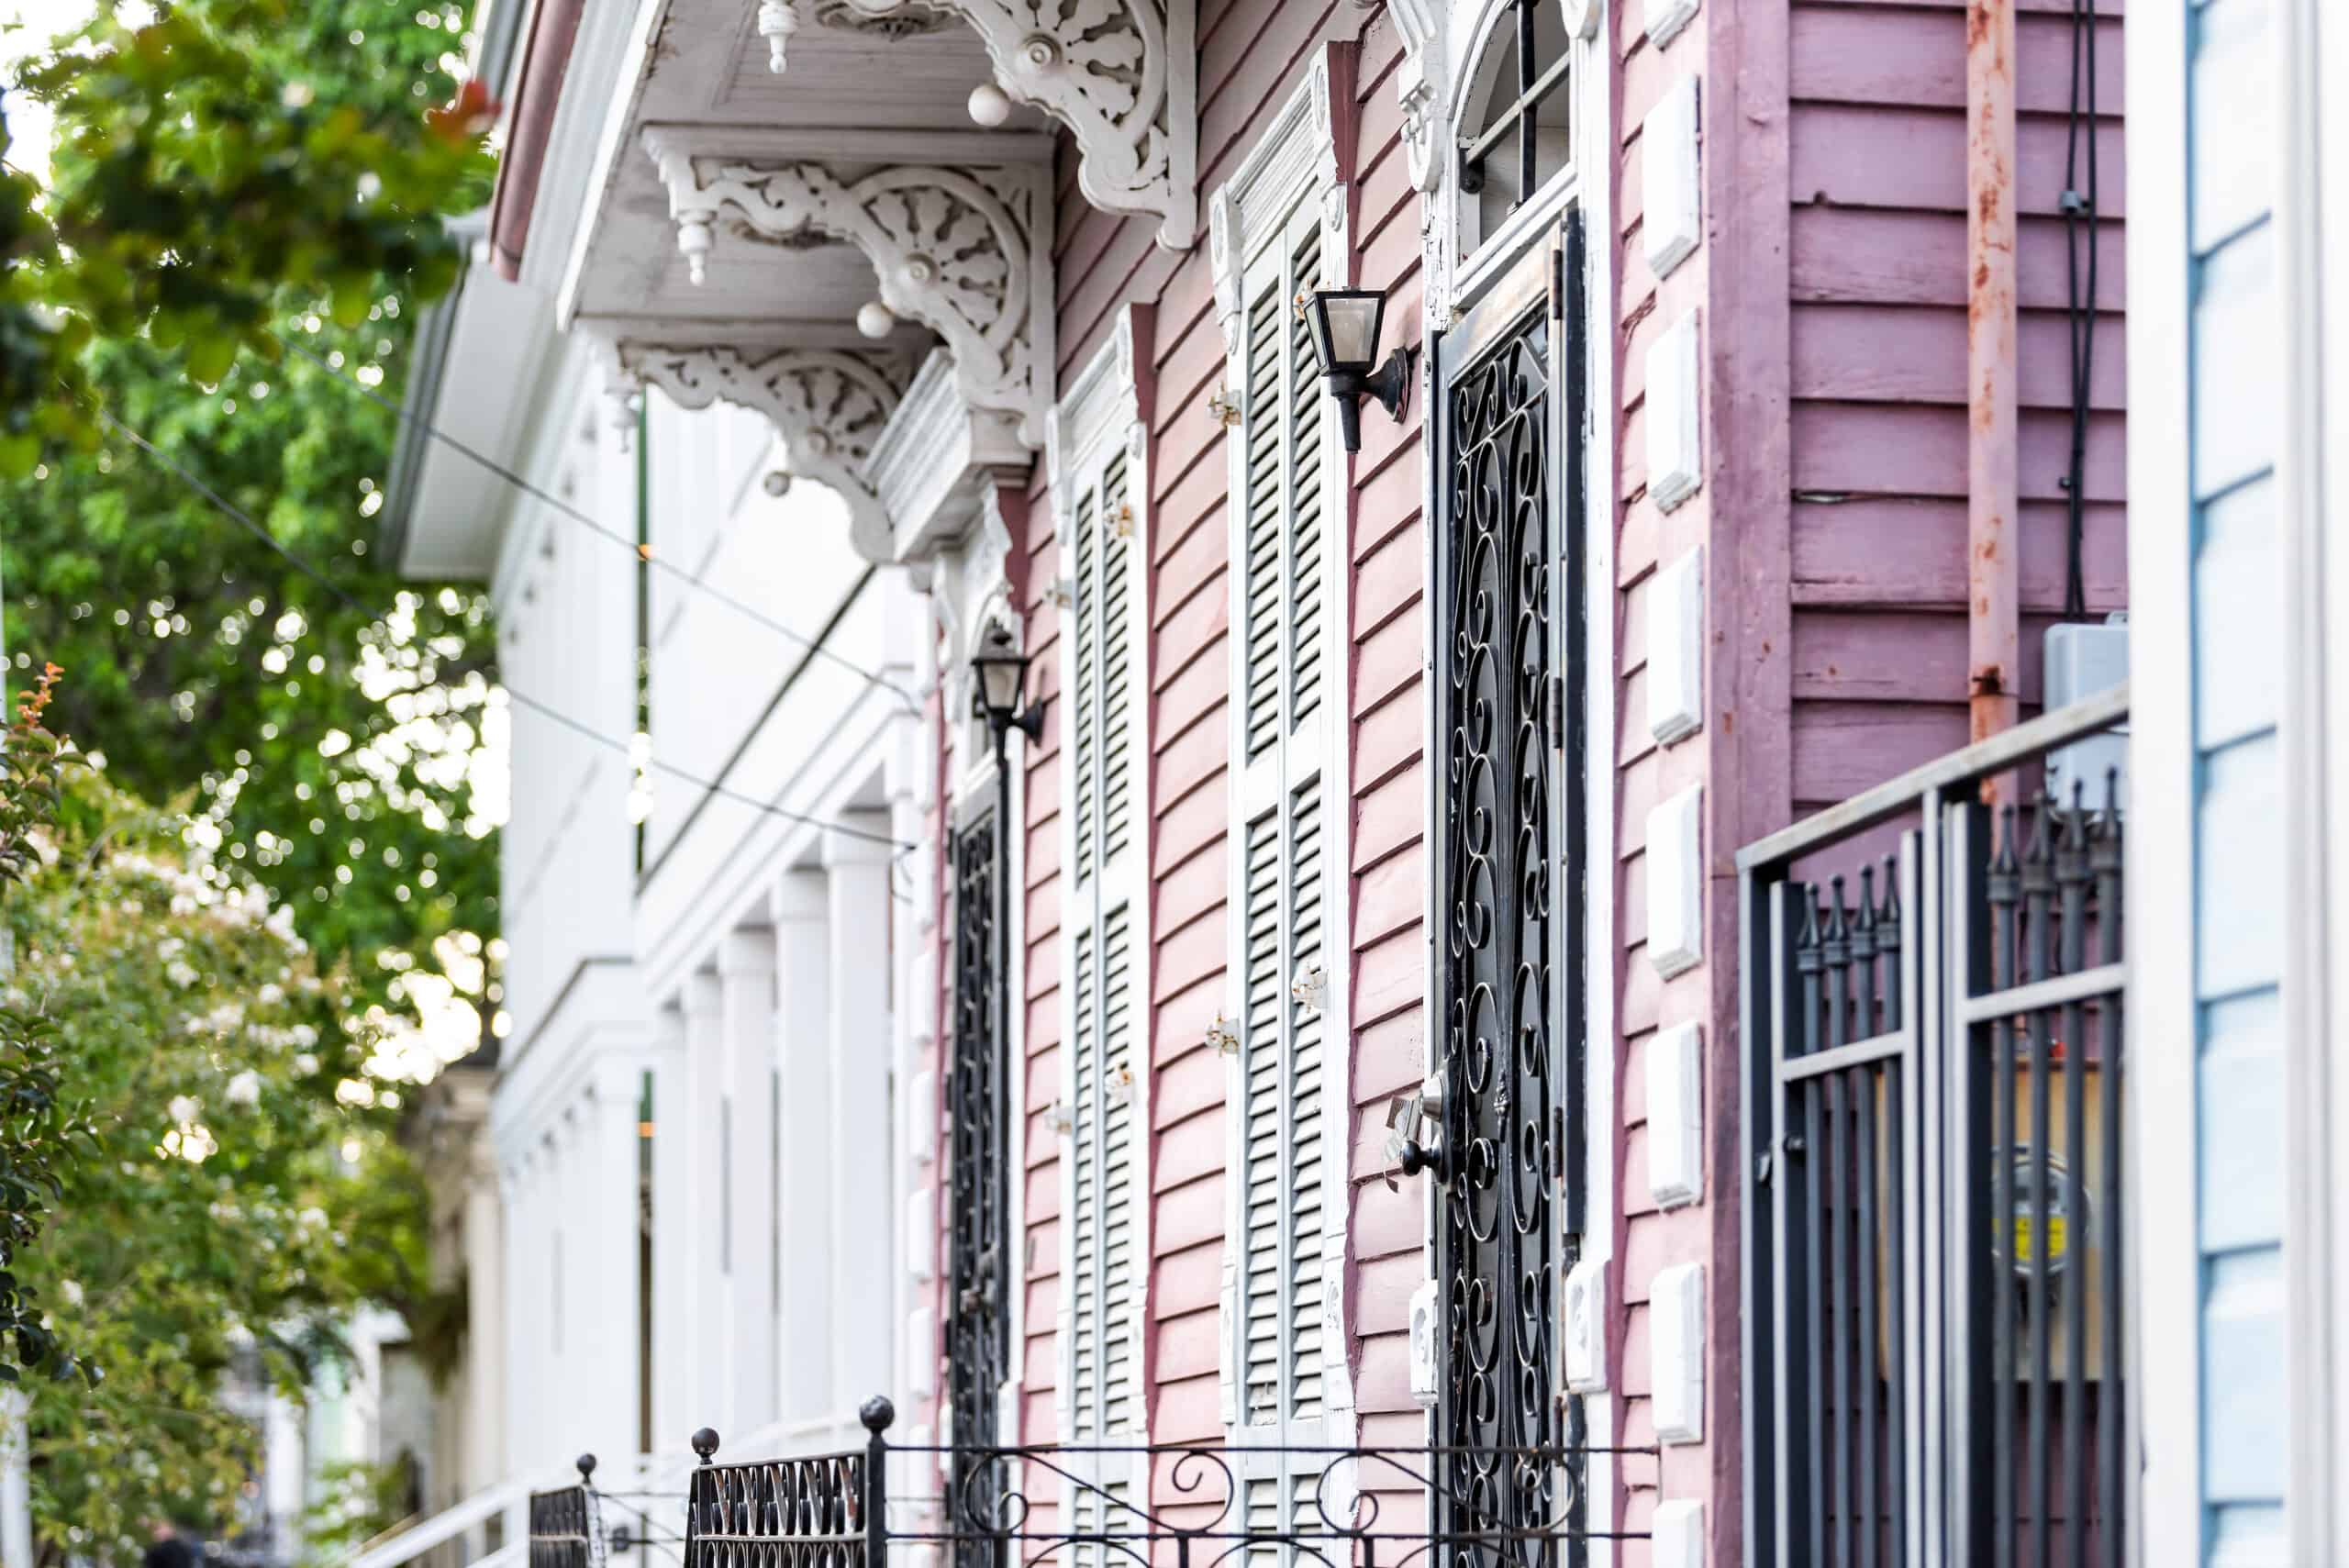 New Orleans, USA Old street historic district in Louisiana famous town, city, pink painted house wall colorful entrance, building nobody on sidewalk